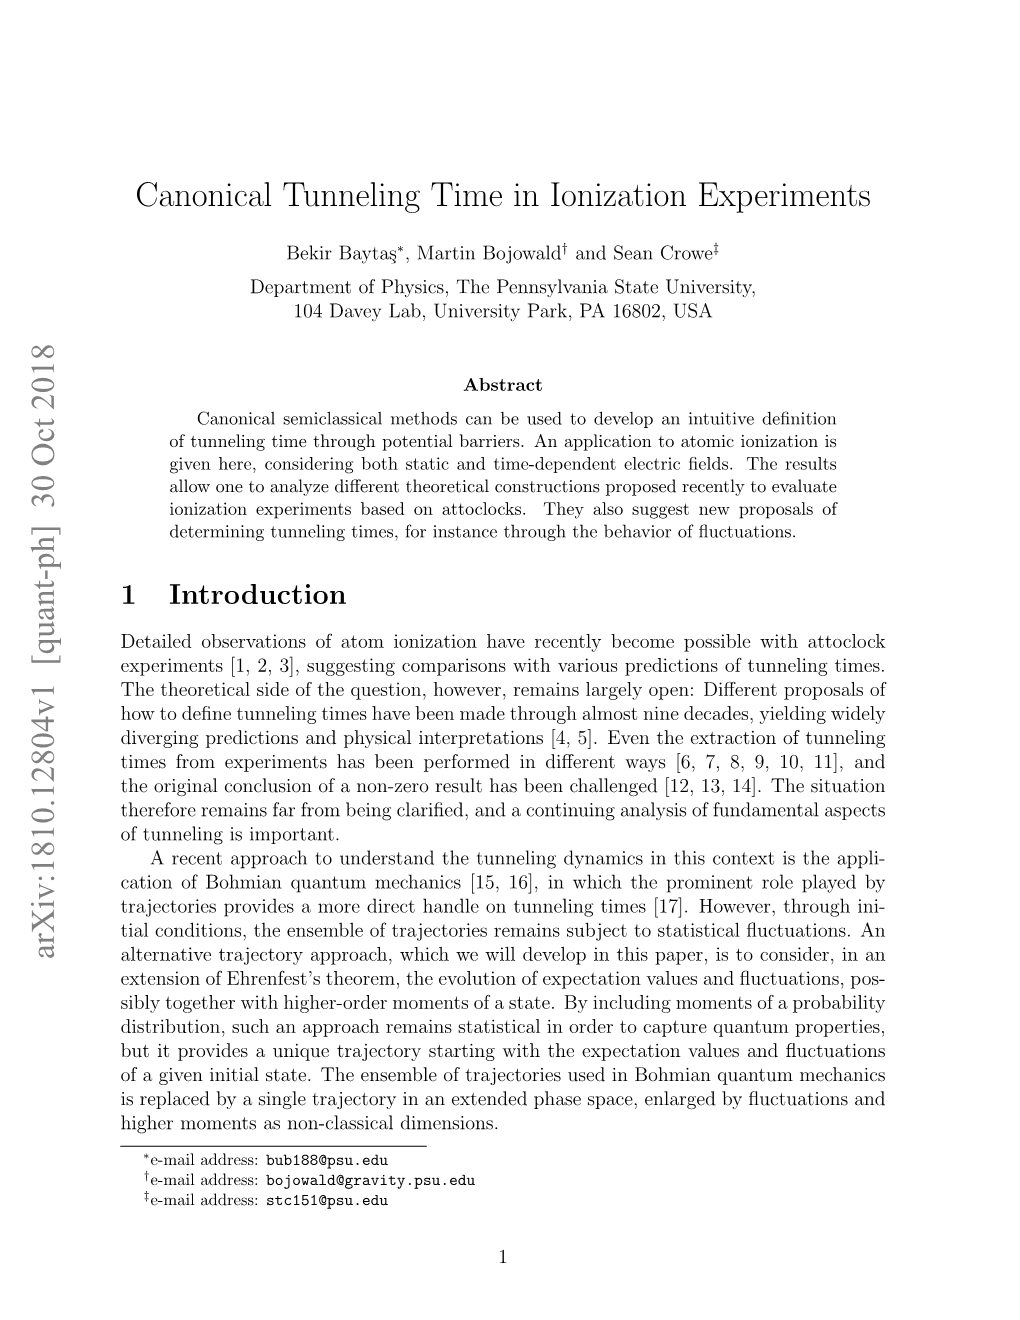 Canonical Tunneling Time in Ionization Experiments Arxiv